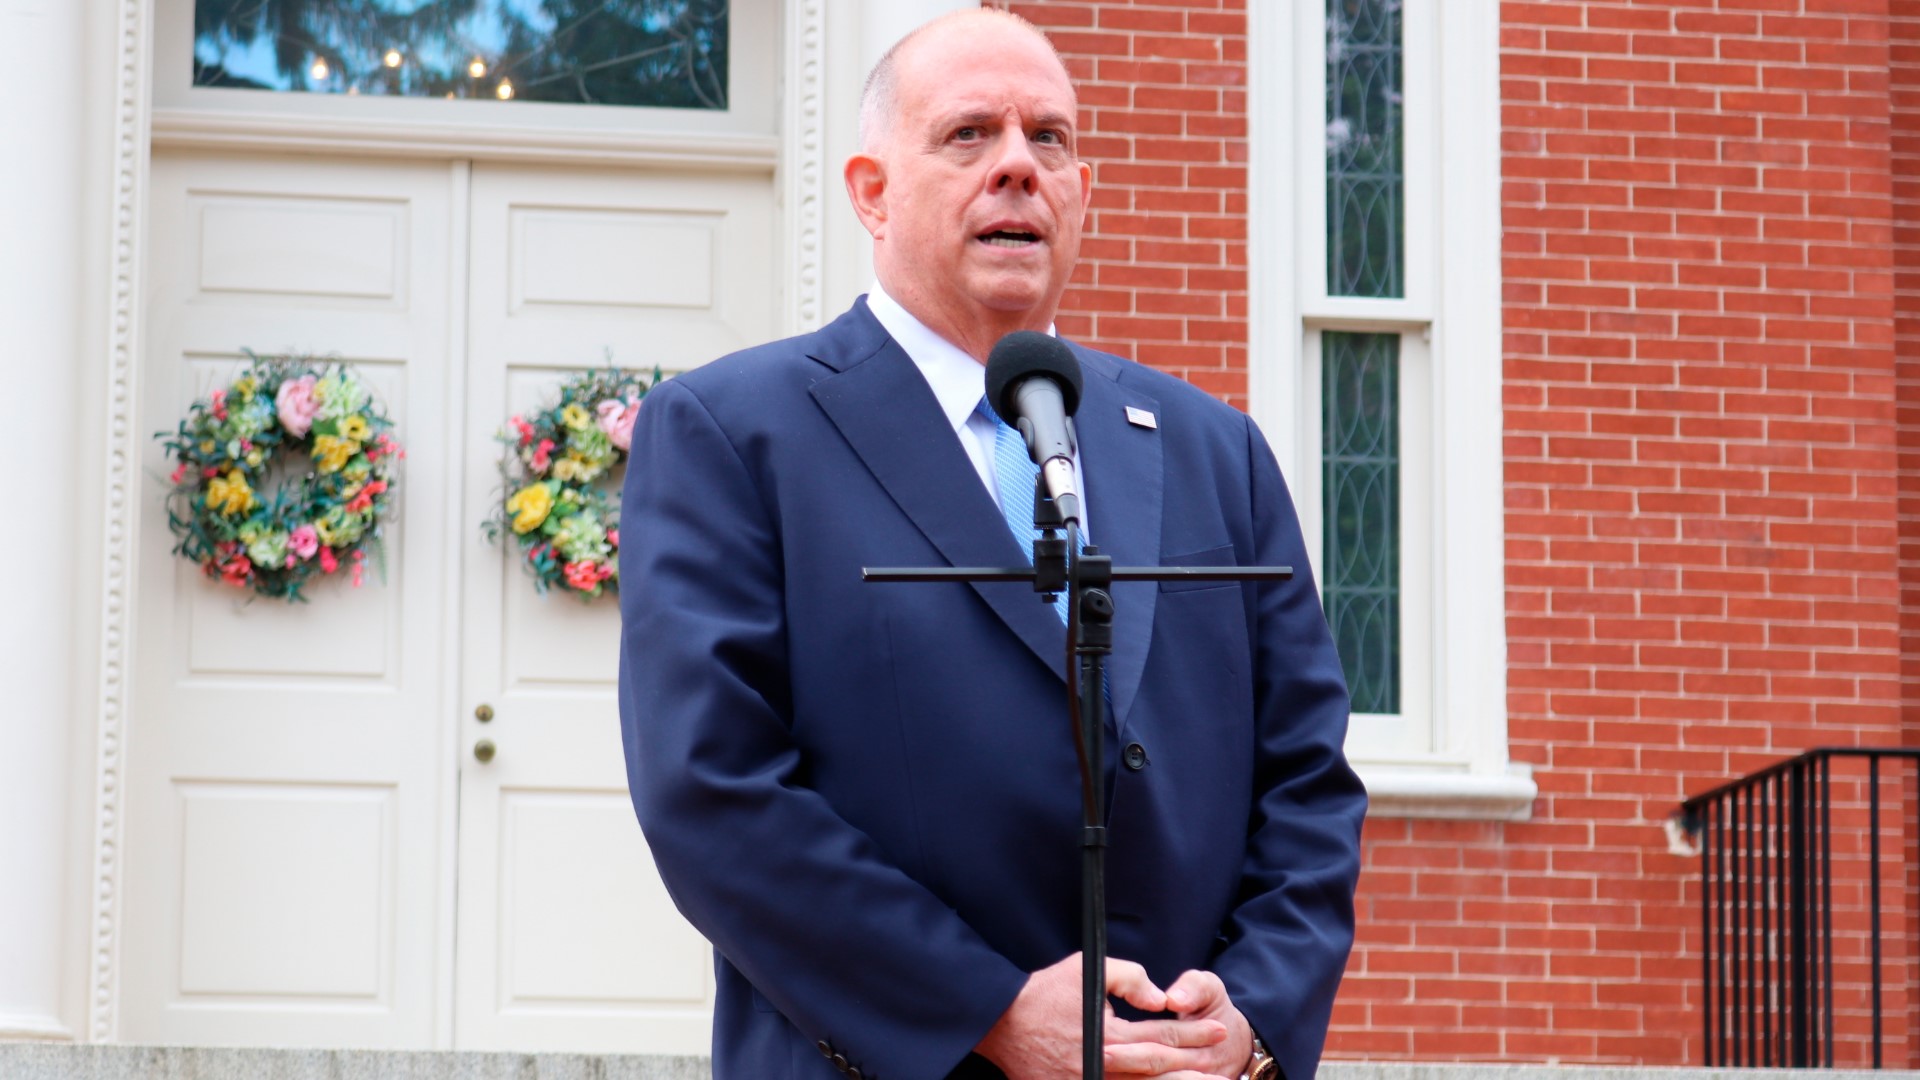 Over the course of the pandemic, Governor Larry Hogan has been very vocal when it comes to reopening schools across the state of Maryland.